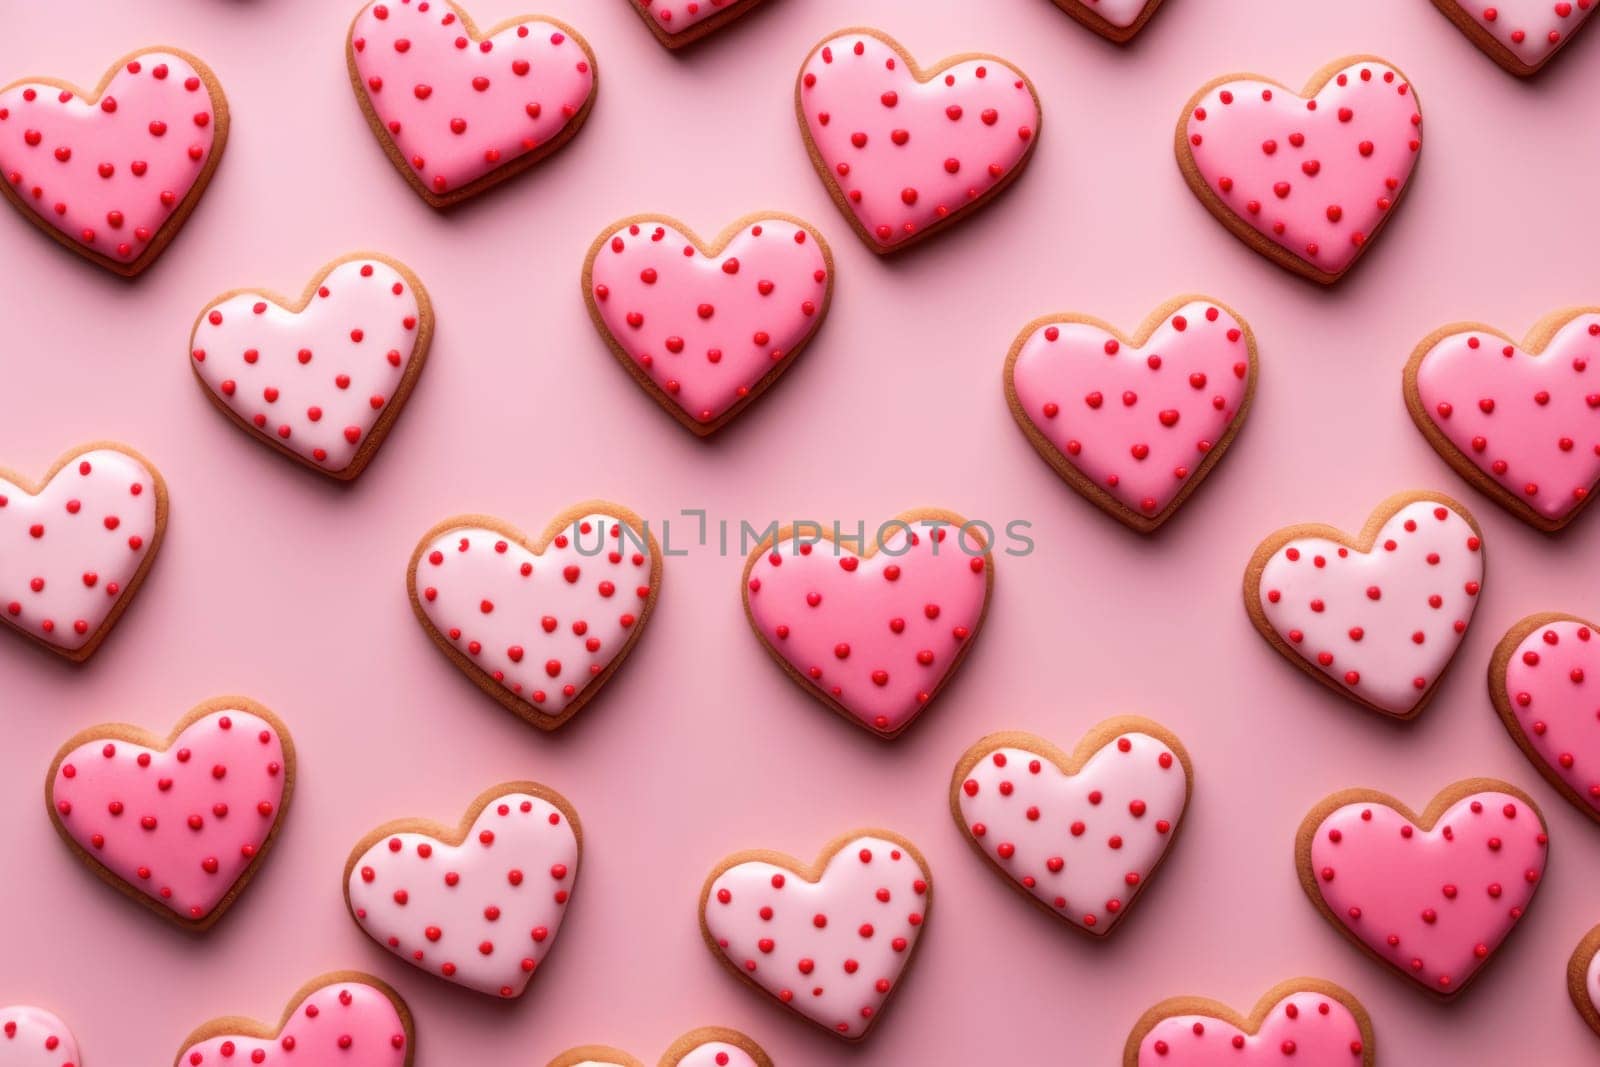 Assorted heart-shaped cookies decorated with pink and red icing and white sprinkles, on a pink background.